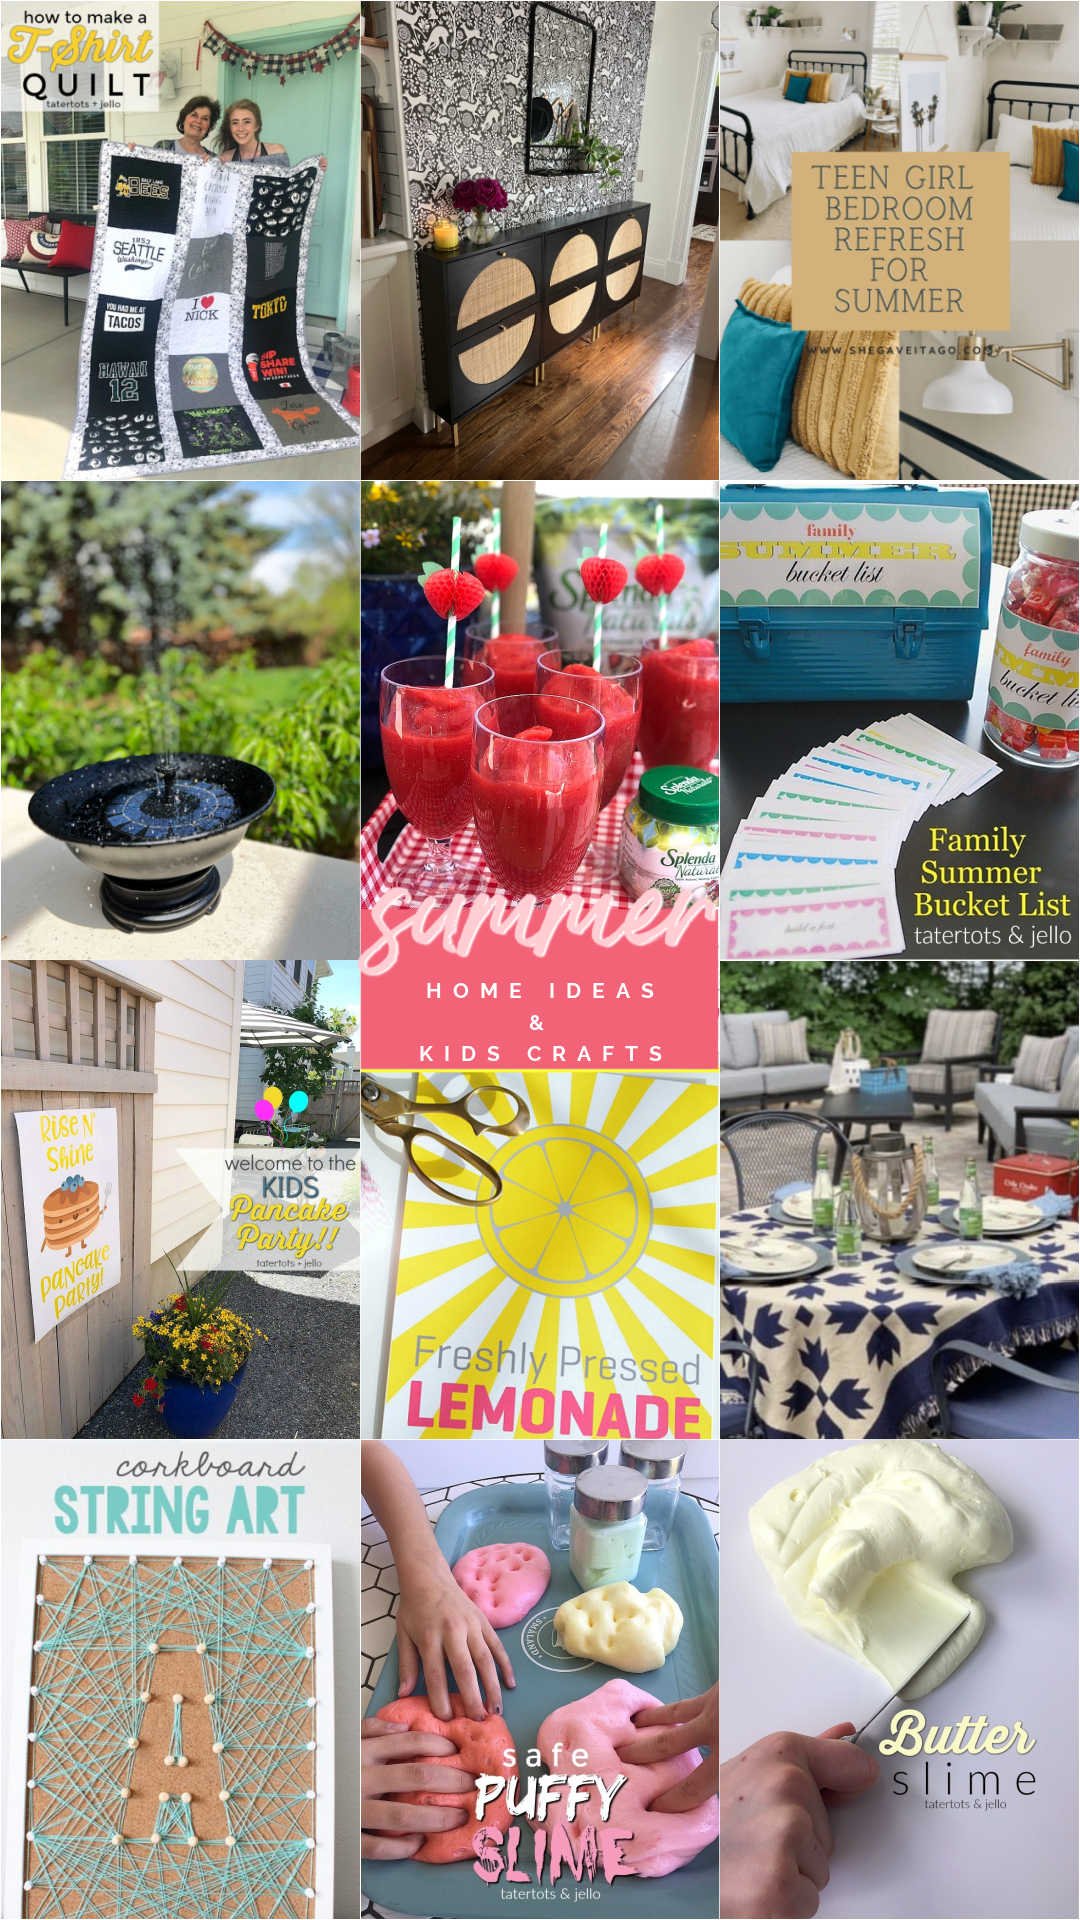 Summer Home Ideas and Kids Crafts. Celebrate Summer, warmer weather and the end of school with these sunny ideas! 